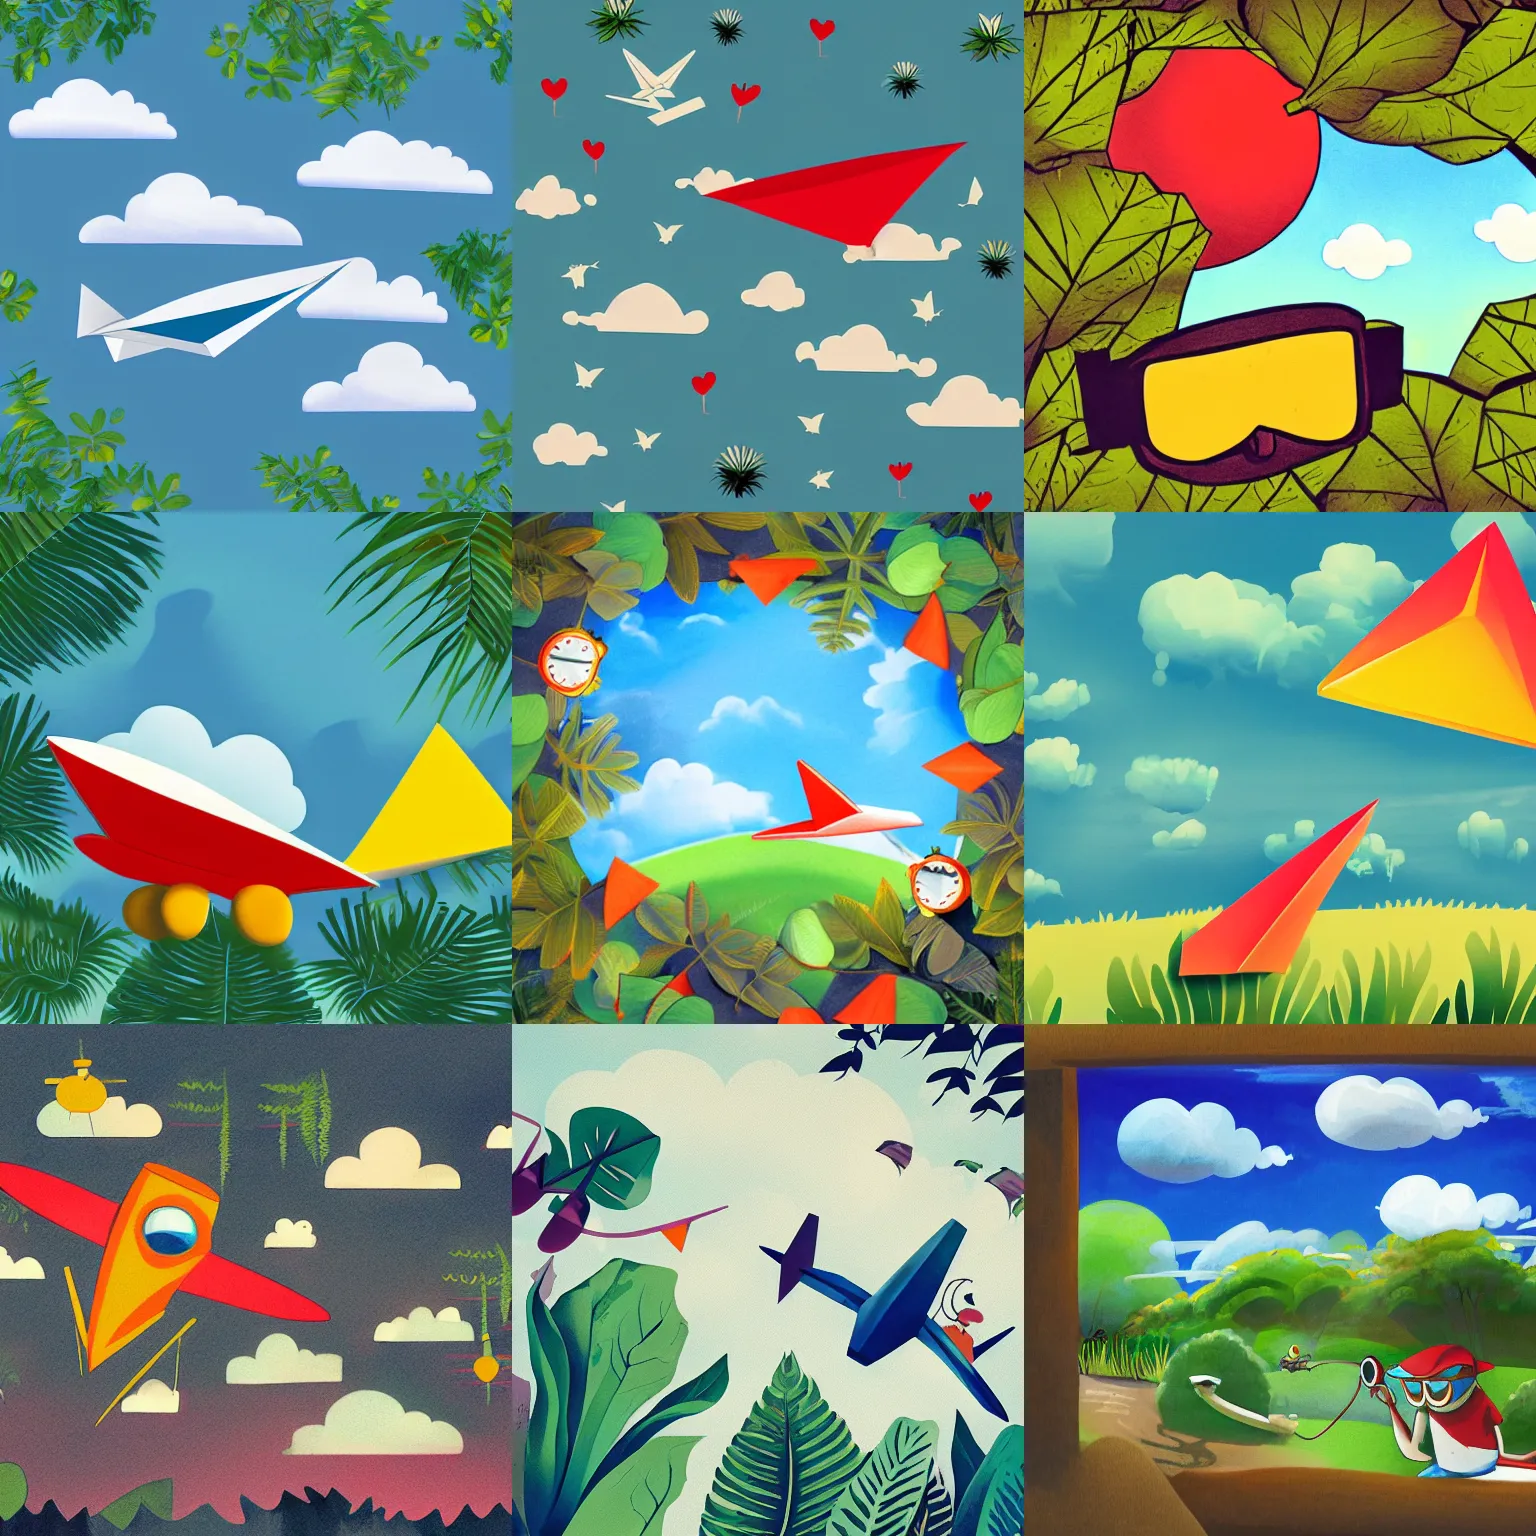 Prompt: paper plane, sky, clouds, plants, trees, mouse wearing goggles, atmospheric, full of color, illustration by Disney